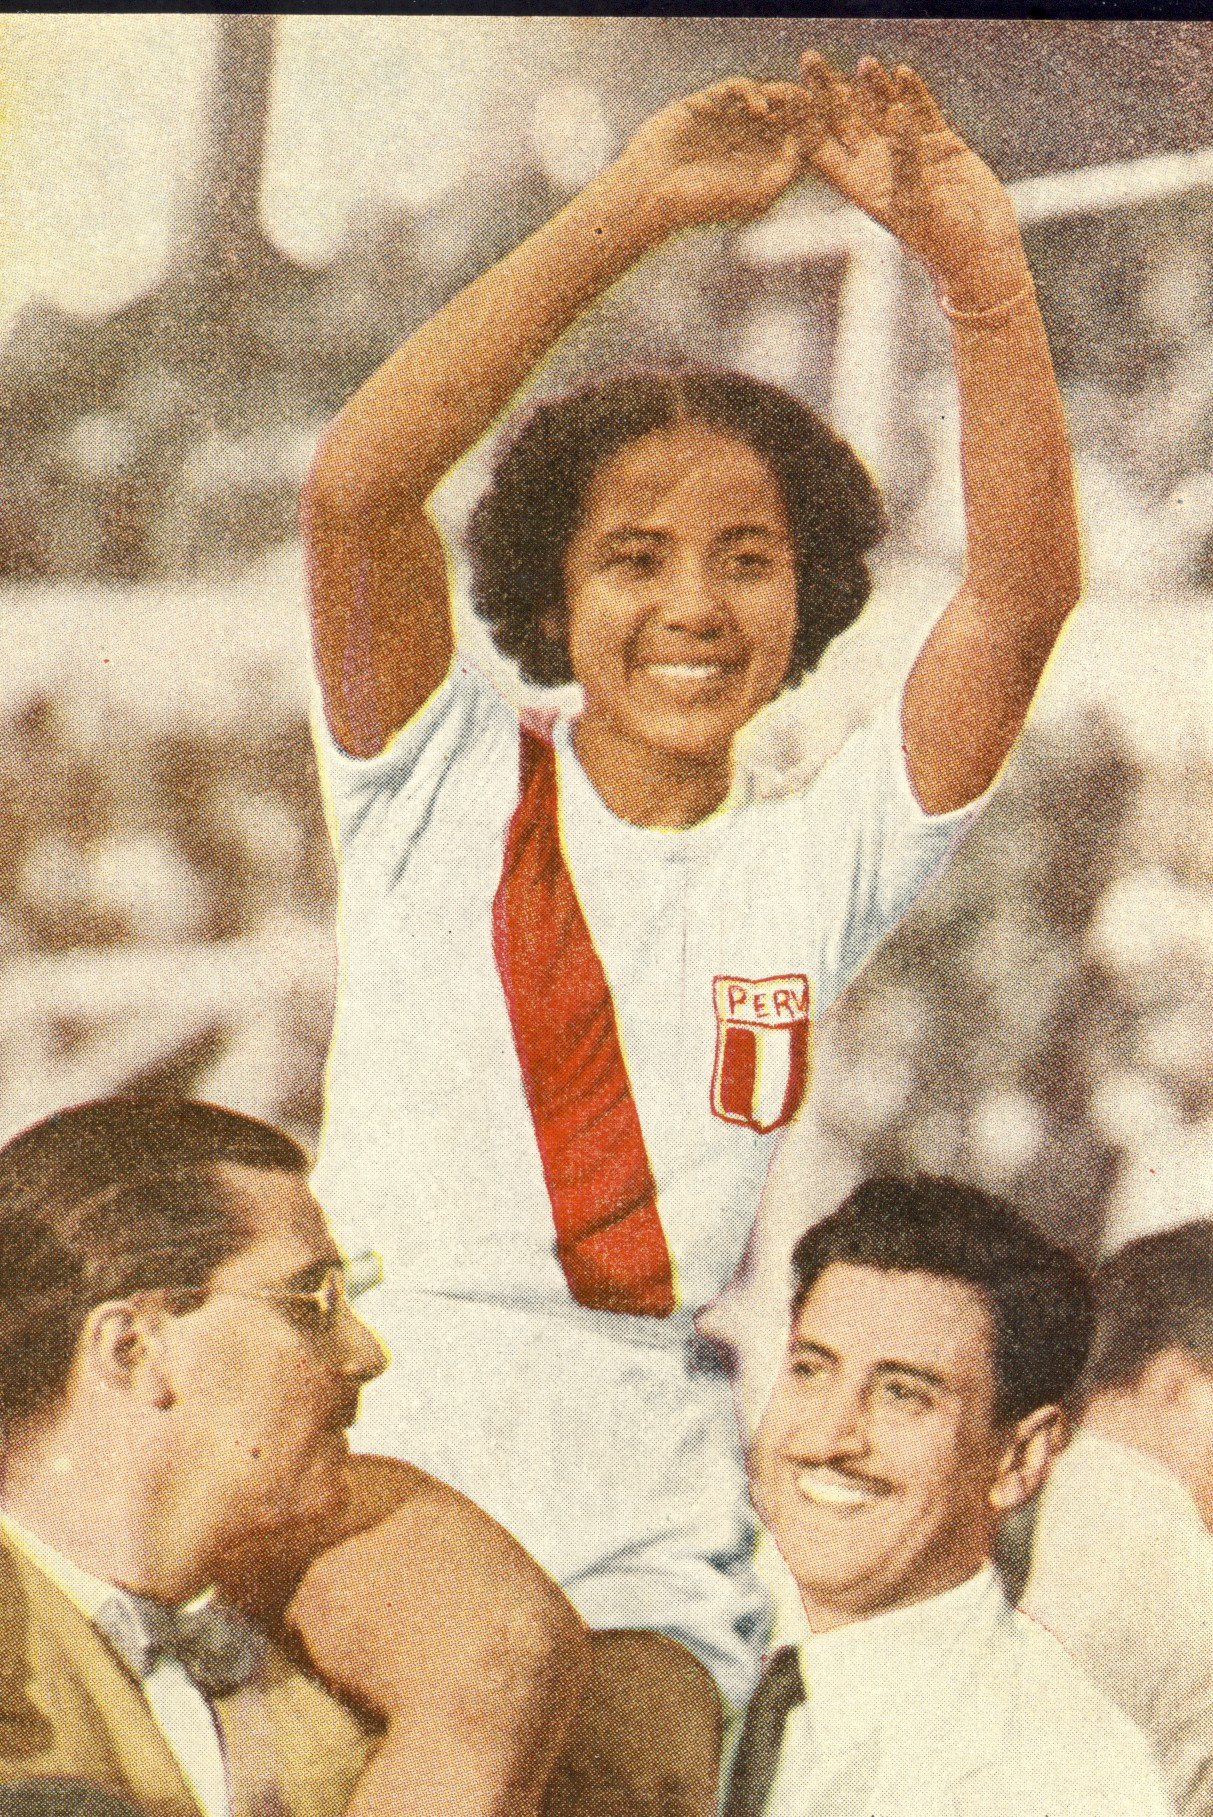 Peru's Julia Sánchez, who was 100 metres champion at the inaugural Pan American Games in 1951 ©Philip Barker